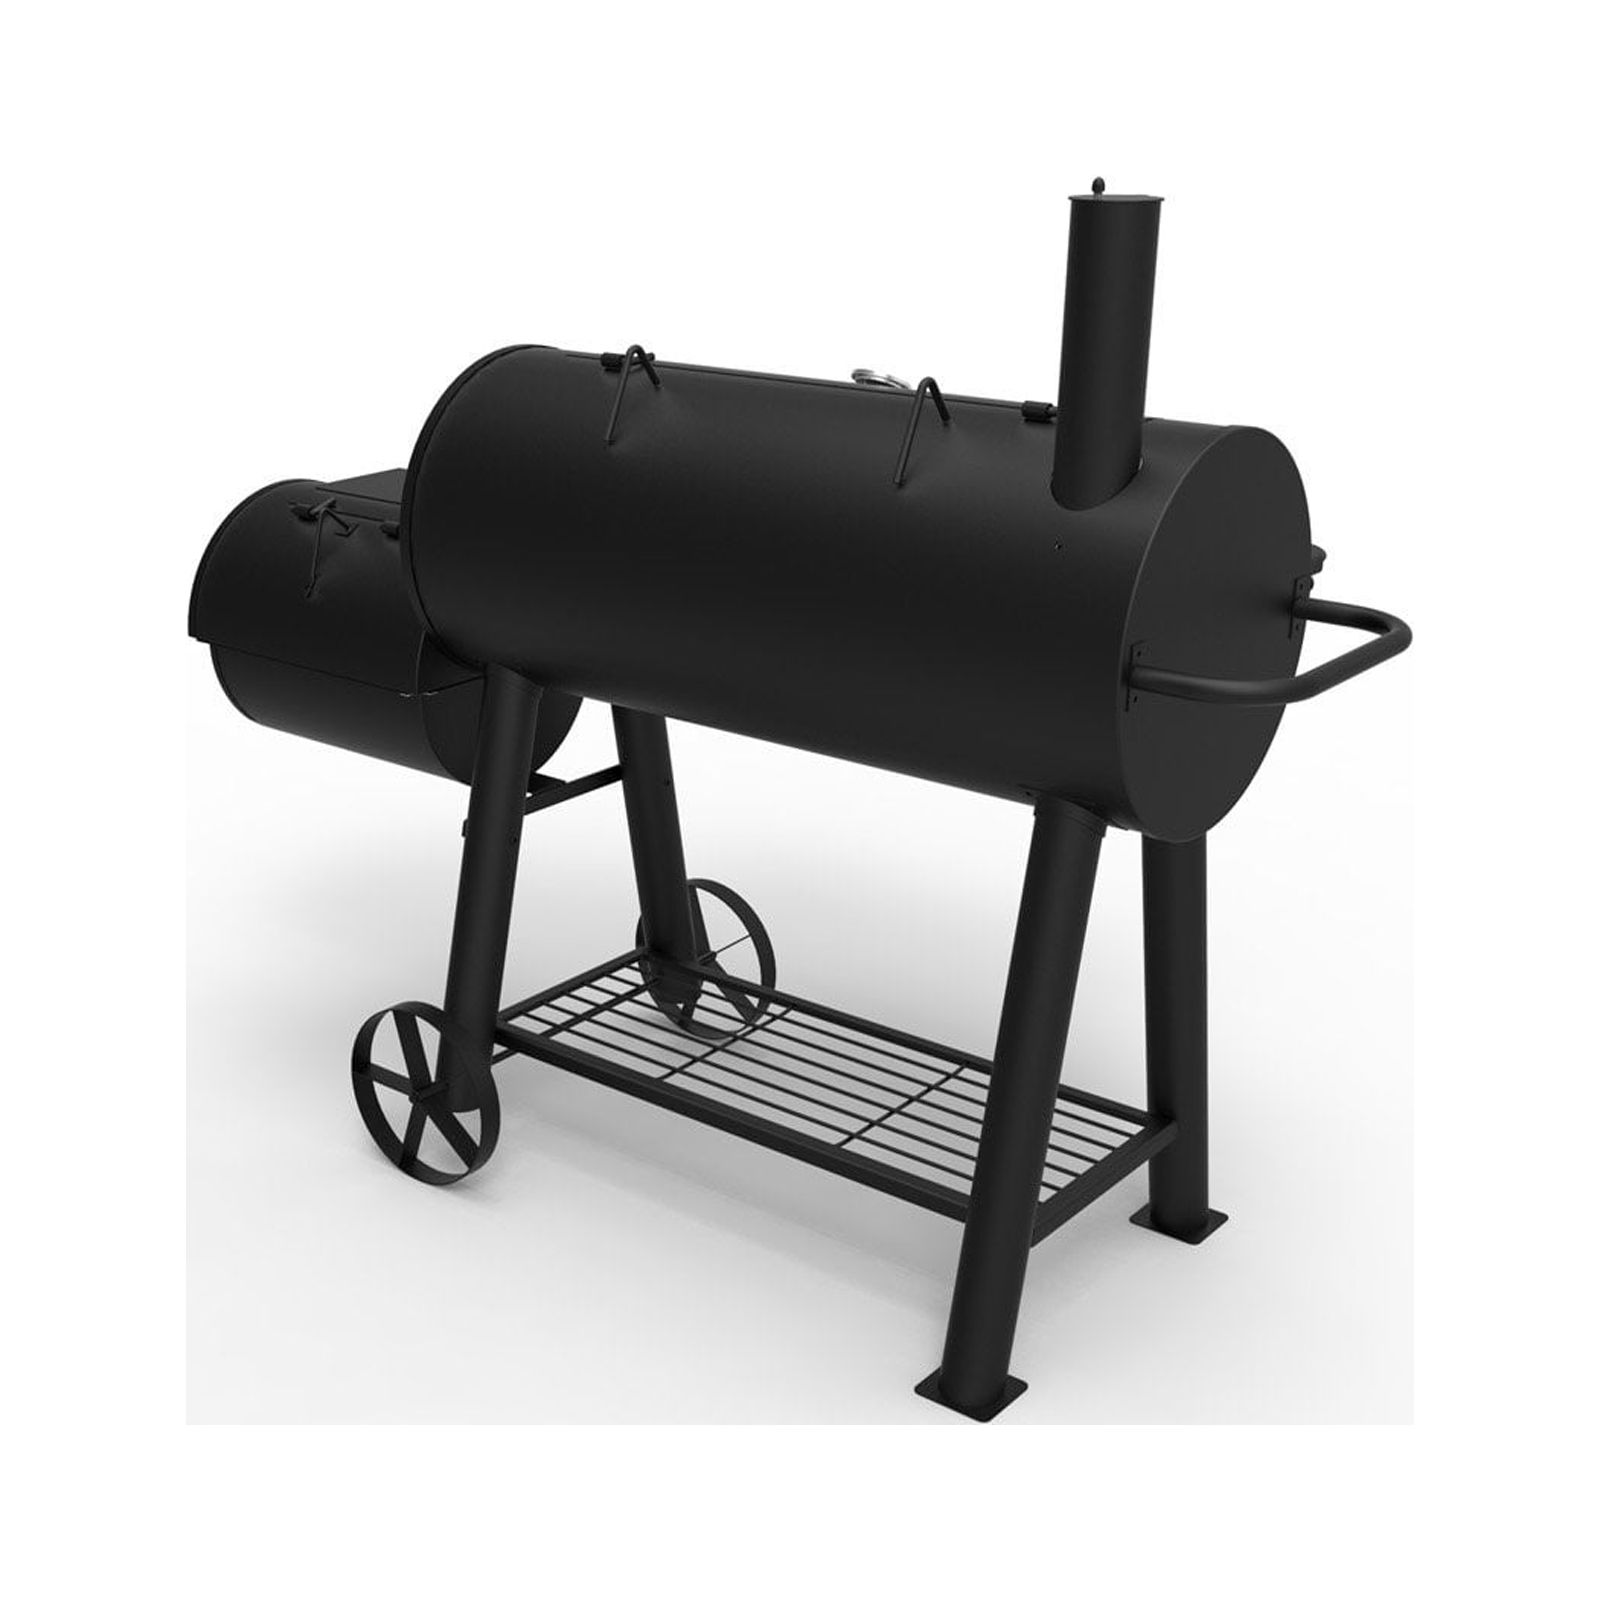 Char-Griller Competition Pro 8125 Charcoal Grill - image 4 of 4